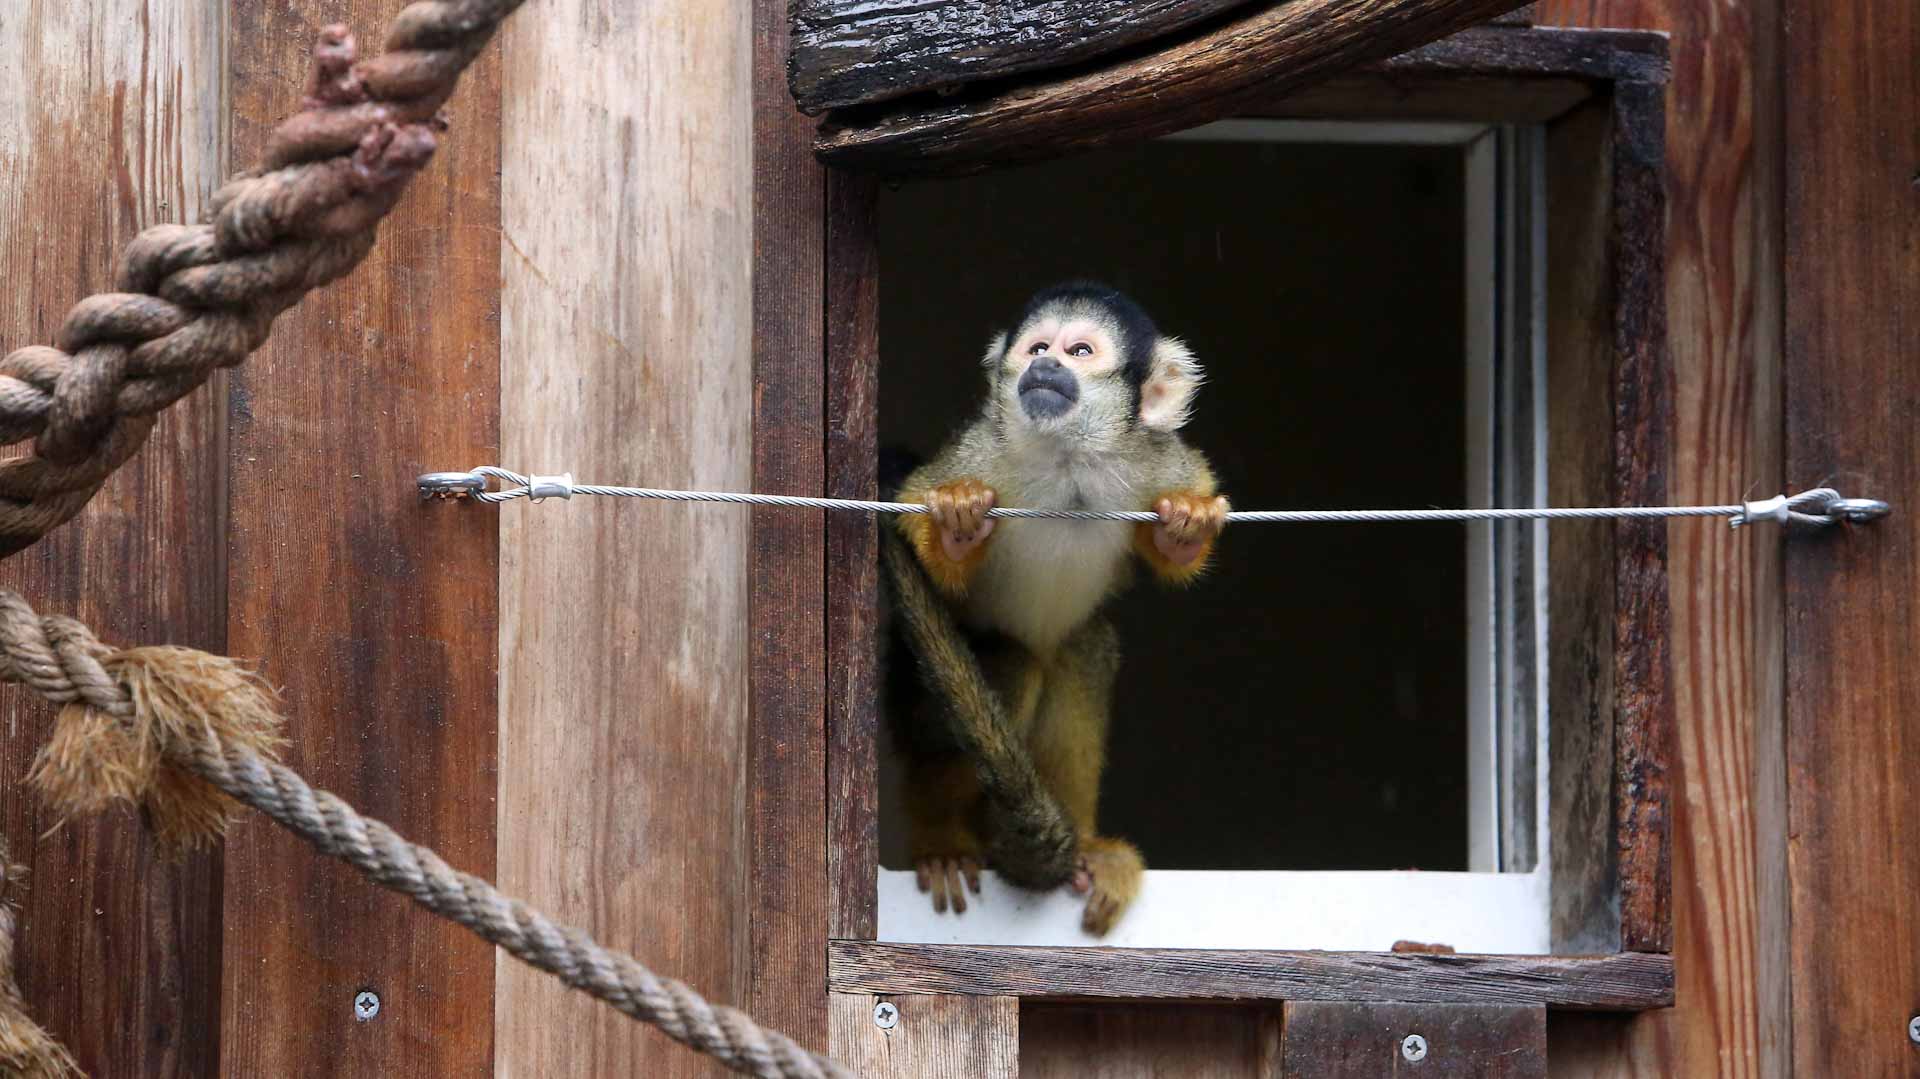 Harvard University research on monkeys sparks outrage from